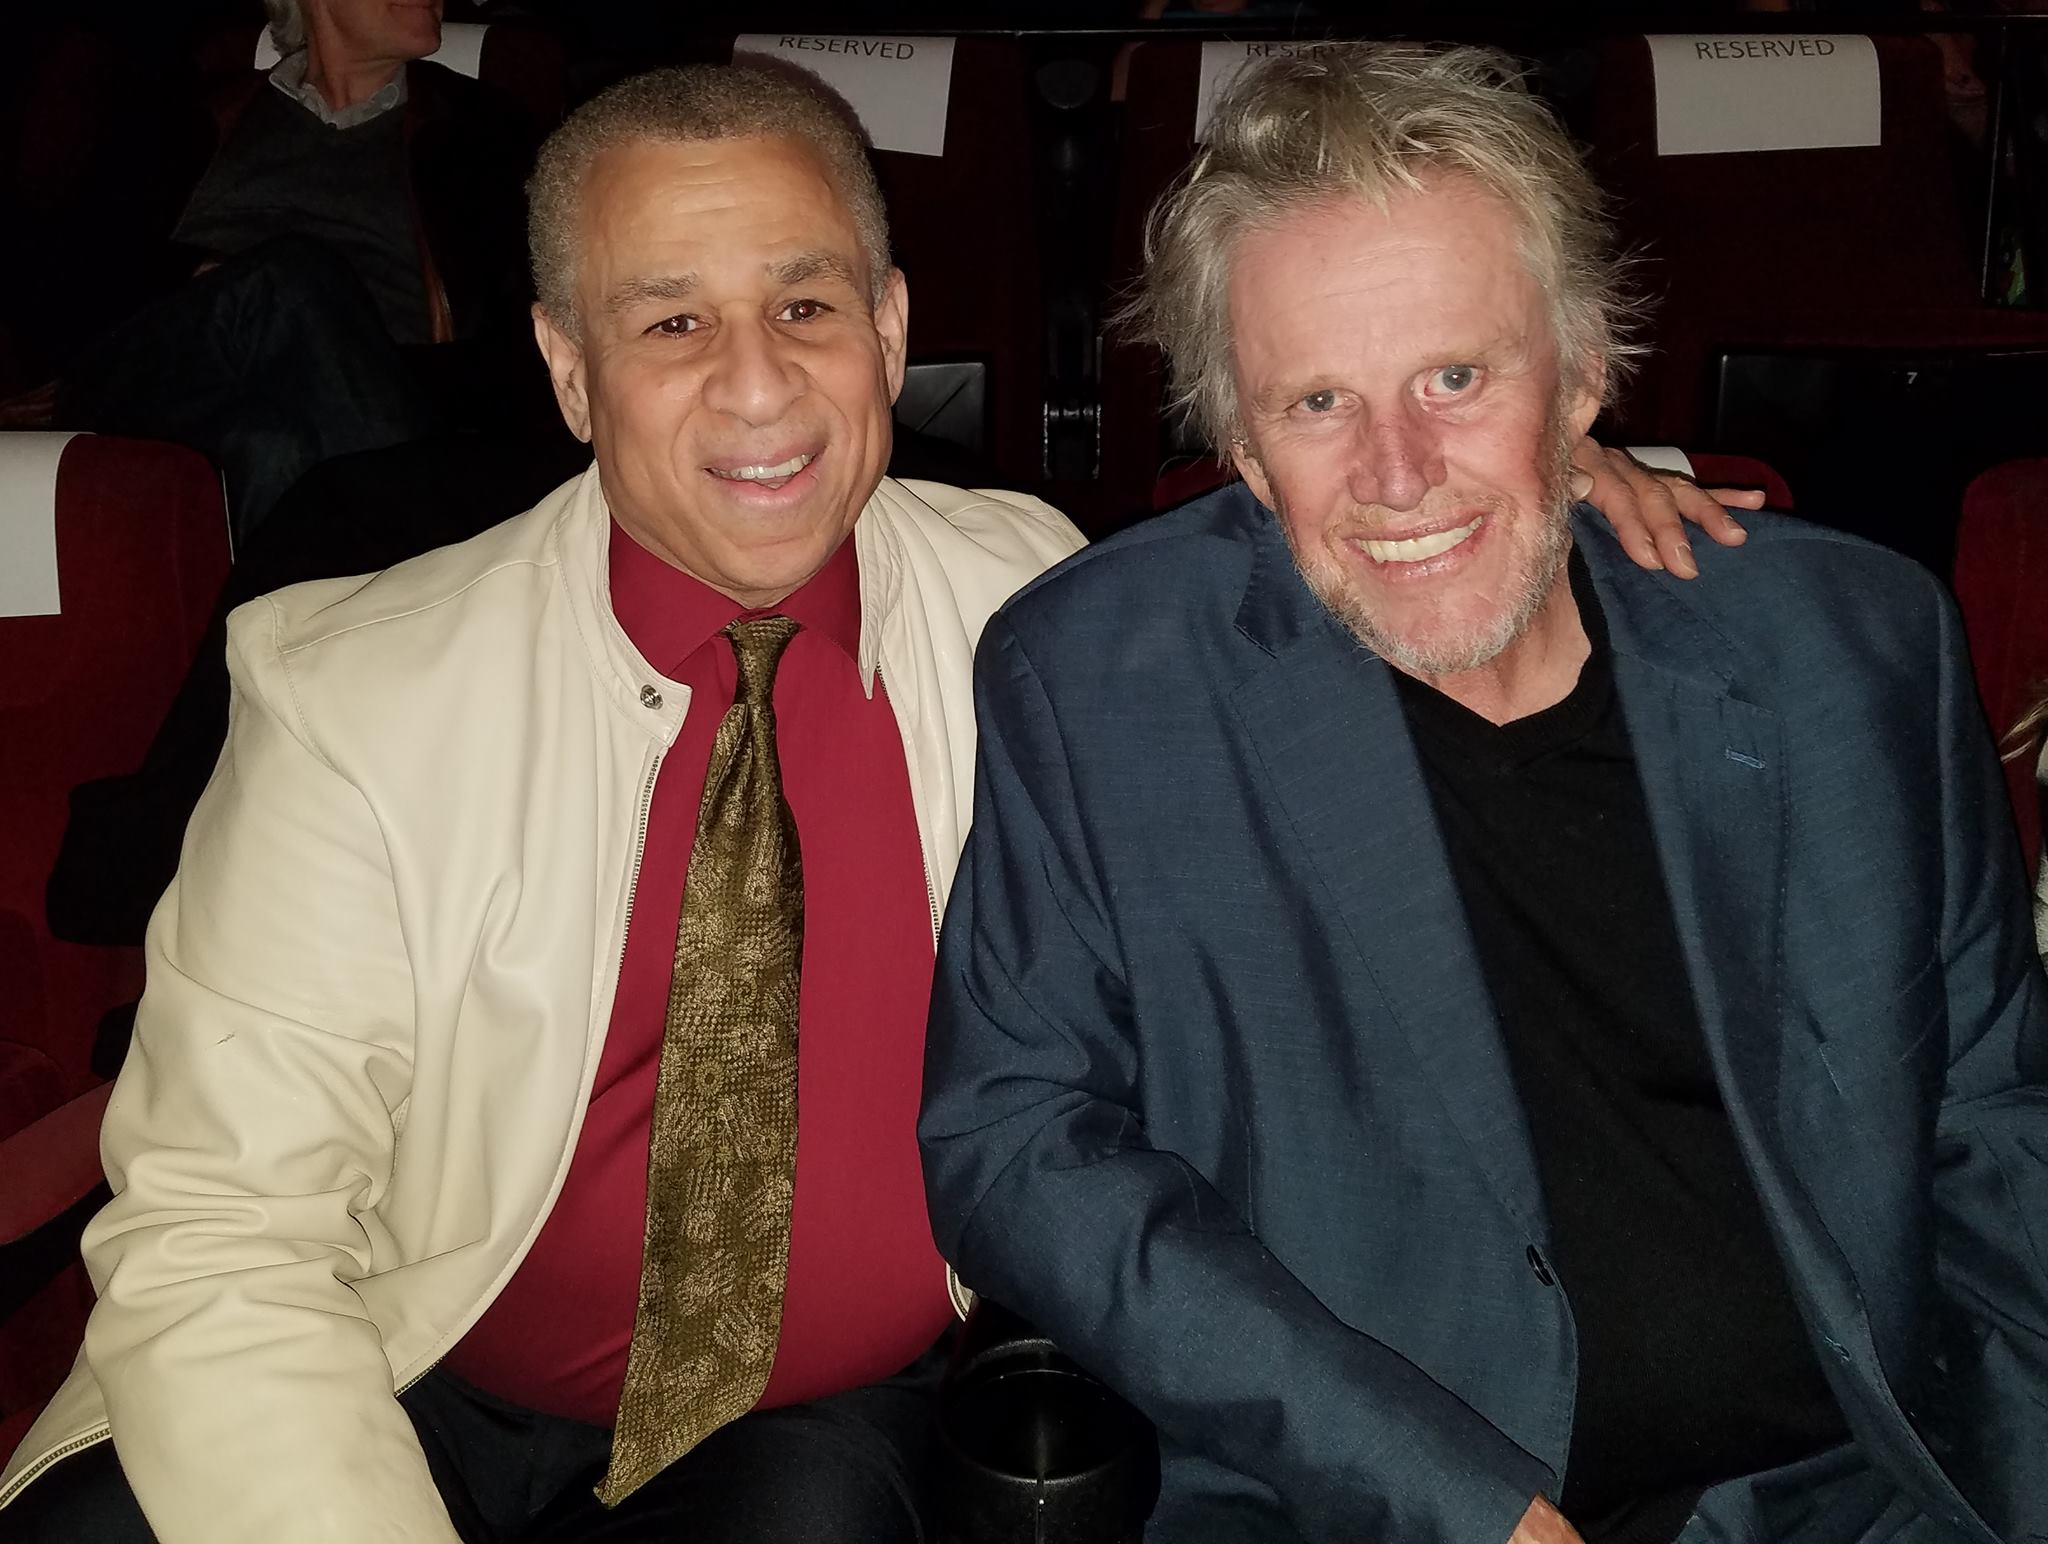 HAPPY BIRTHDAY TODAY (June 29th) to Academy Award-nominated actor GARY BUSEY! 